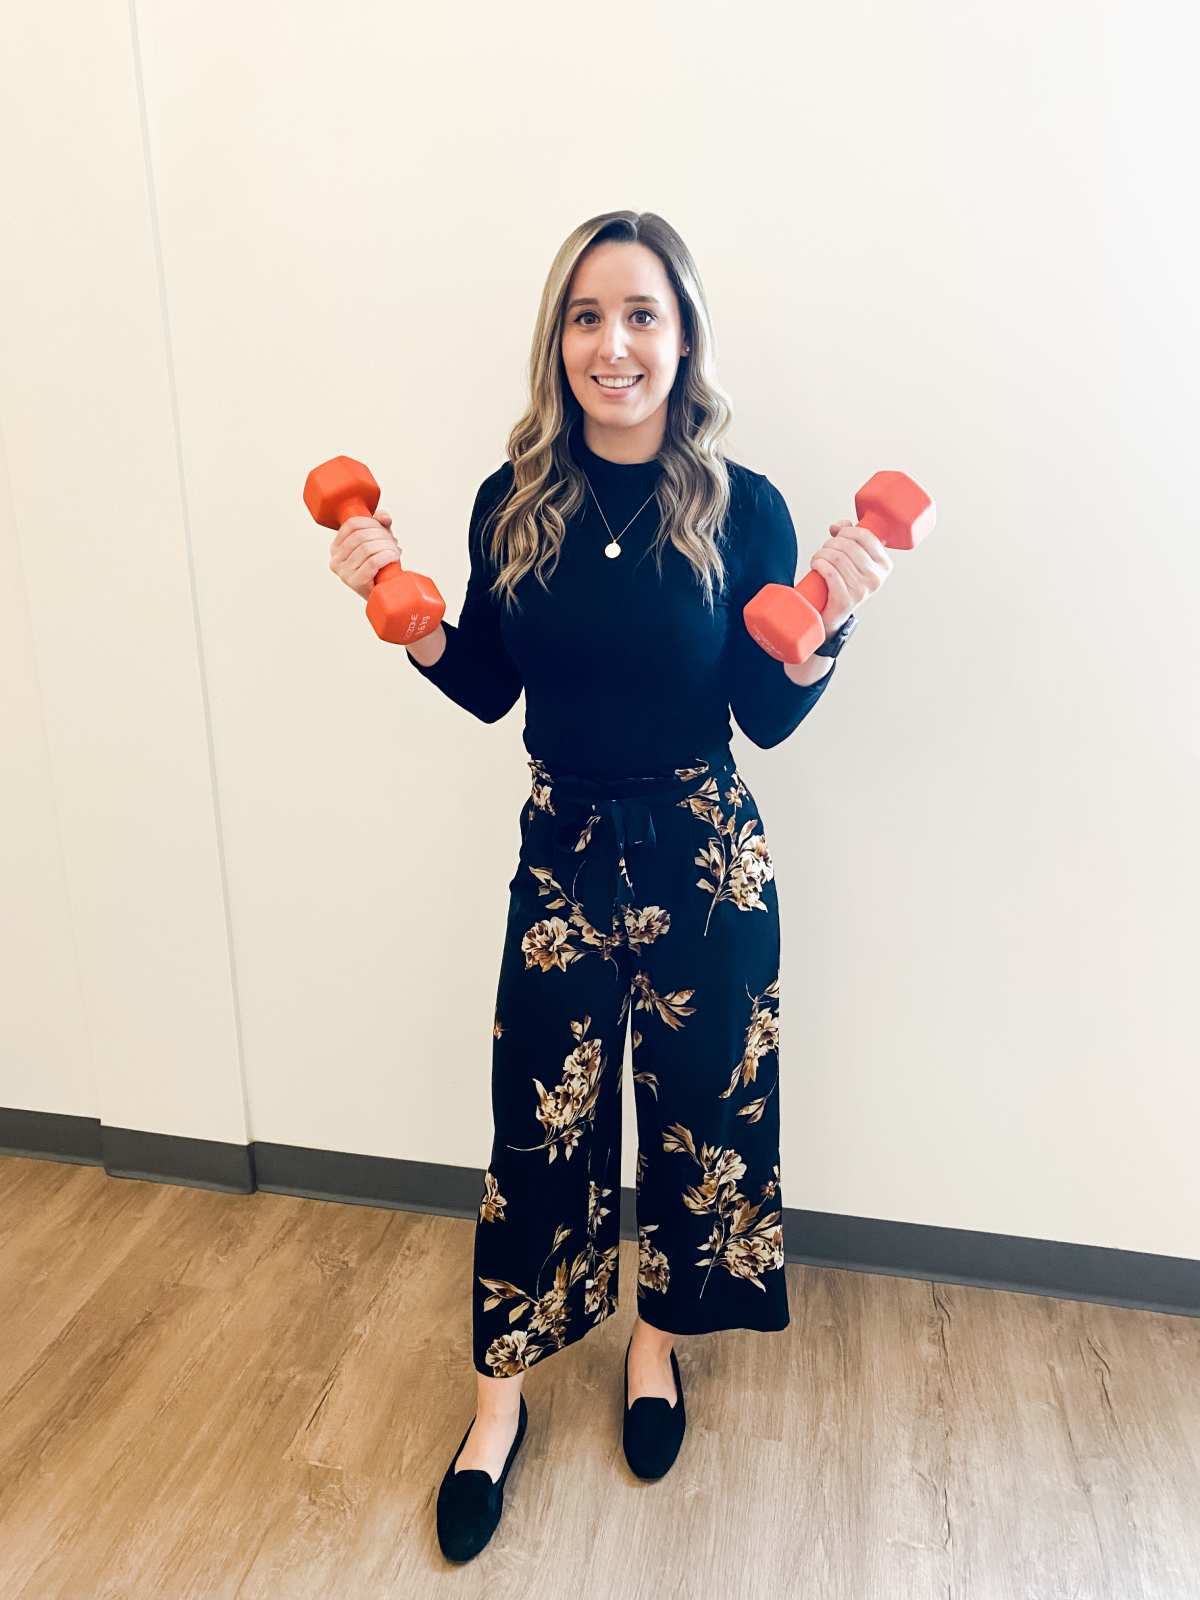 Dr. Vanessa holding a barbell in each hand